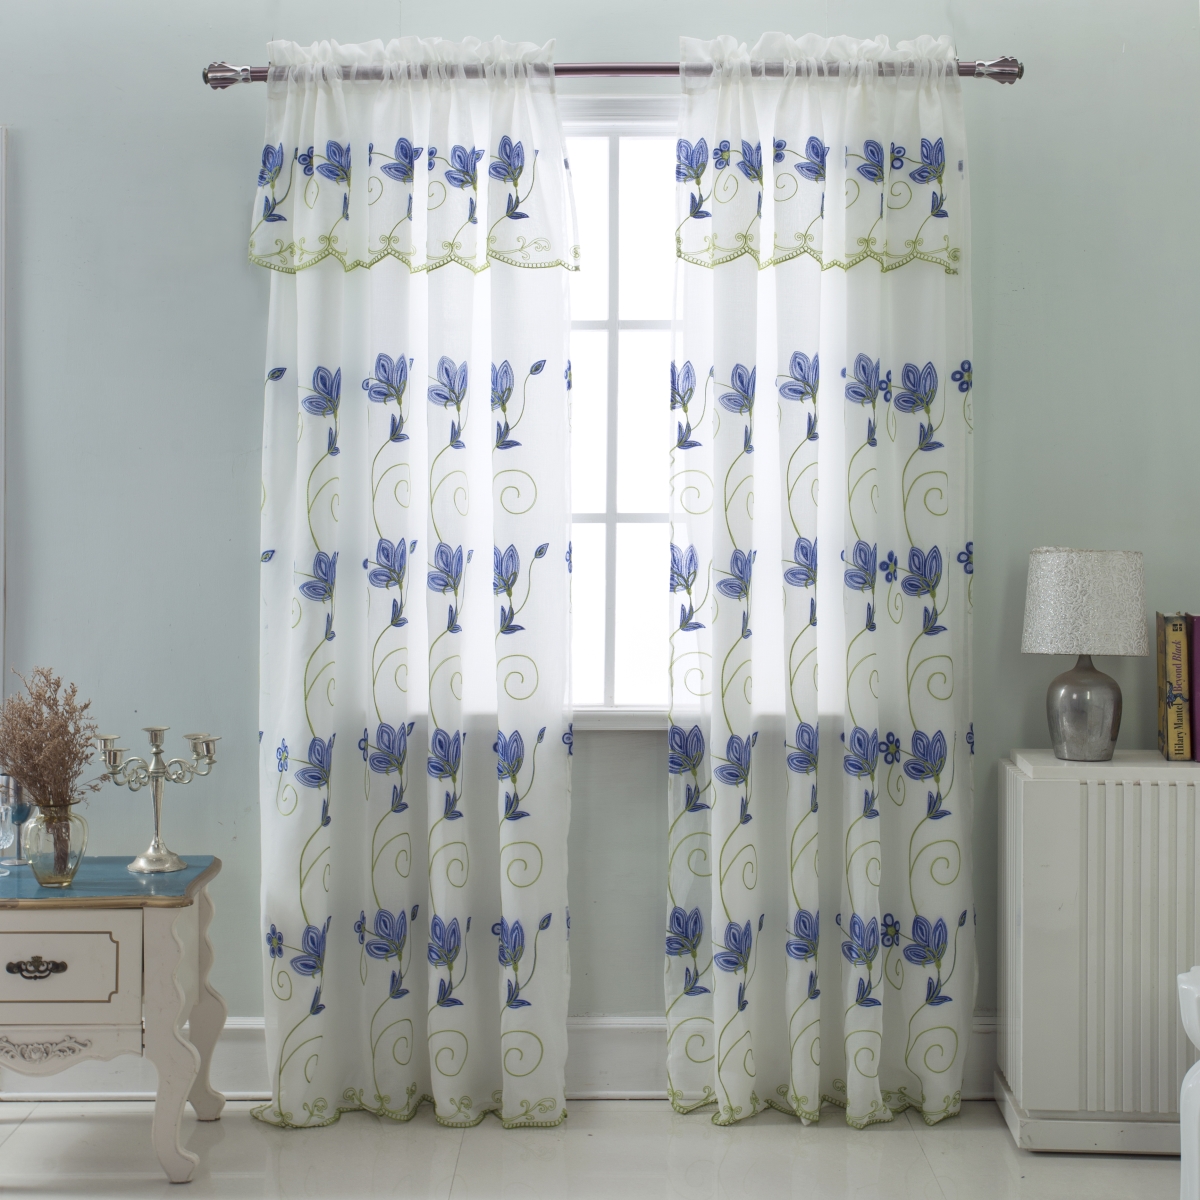 Pnv17156 54 X 84 In. Vittoria Embroidered Satin Layered Rod Pocket Single Curtain Panel With Attached 18 In. Valance, Navy